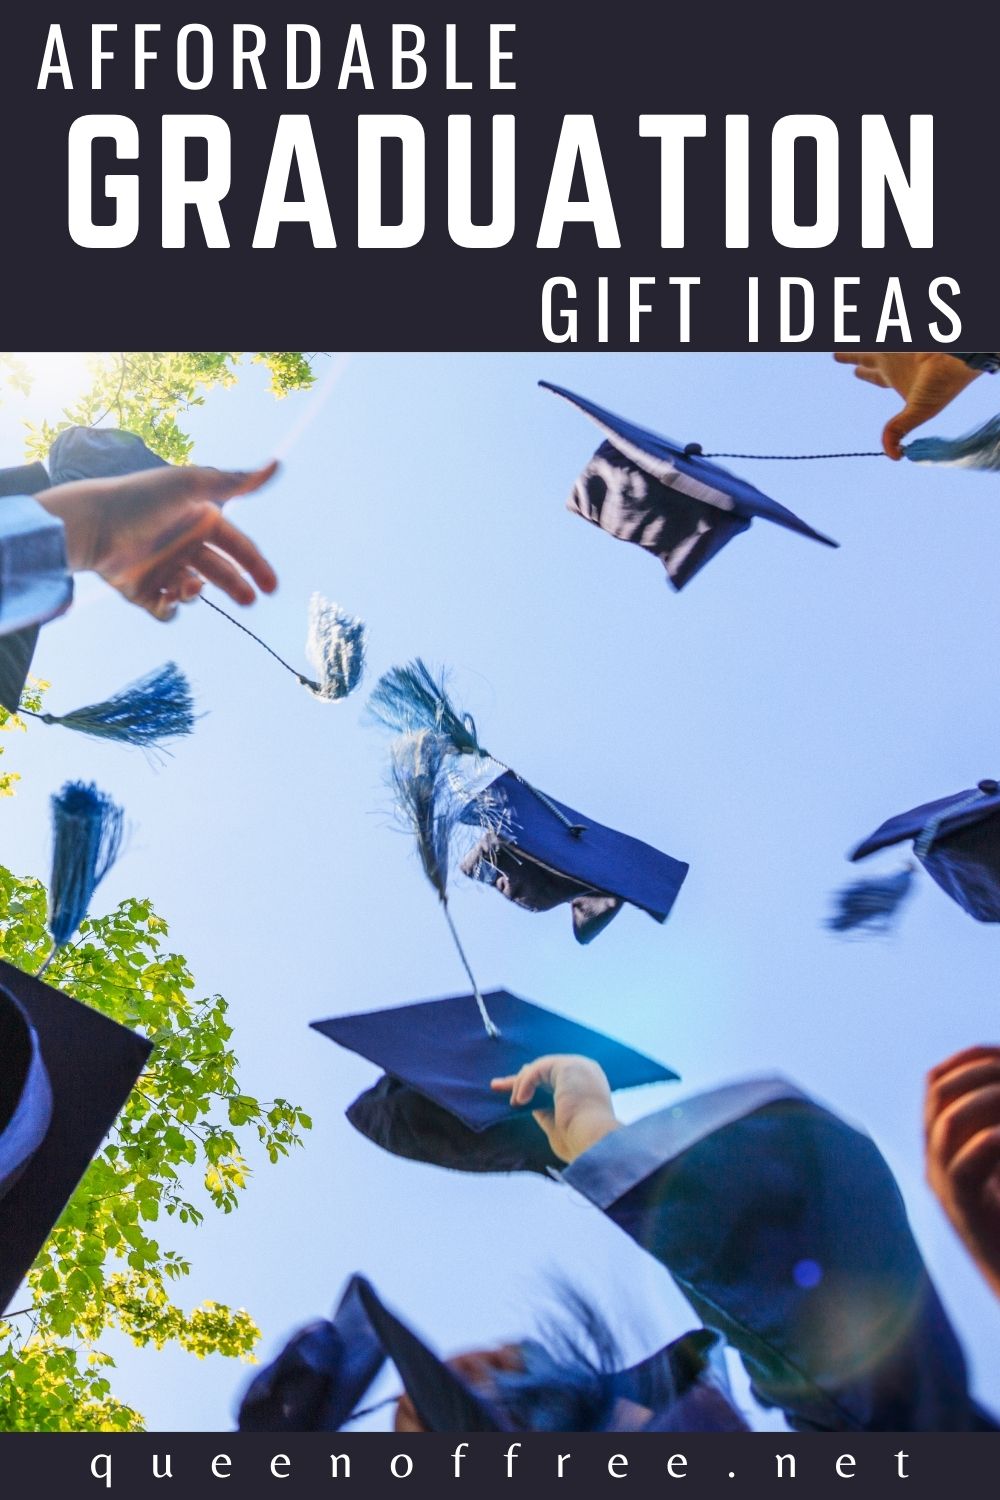 Celebrate the seniors in your life without breaking the bank. Check out these affordable graduation gift ideas!